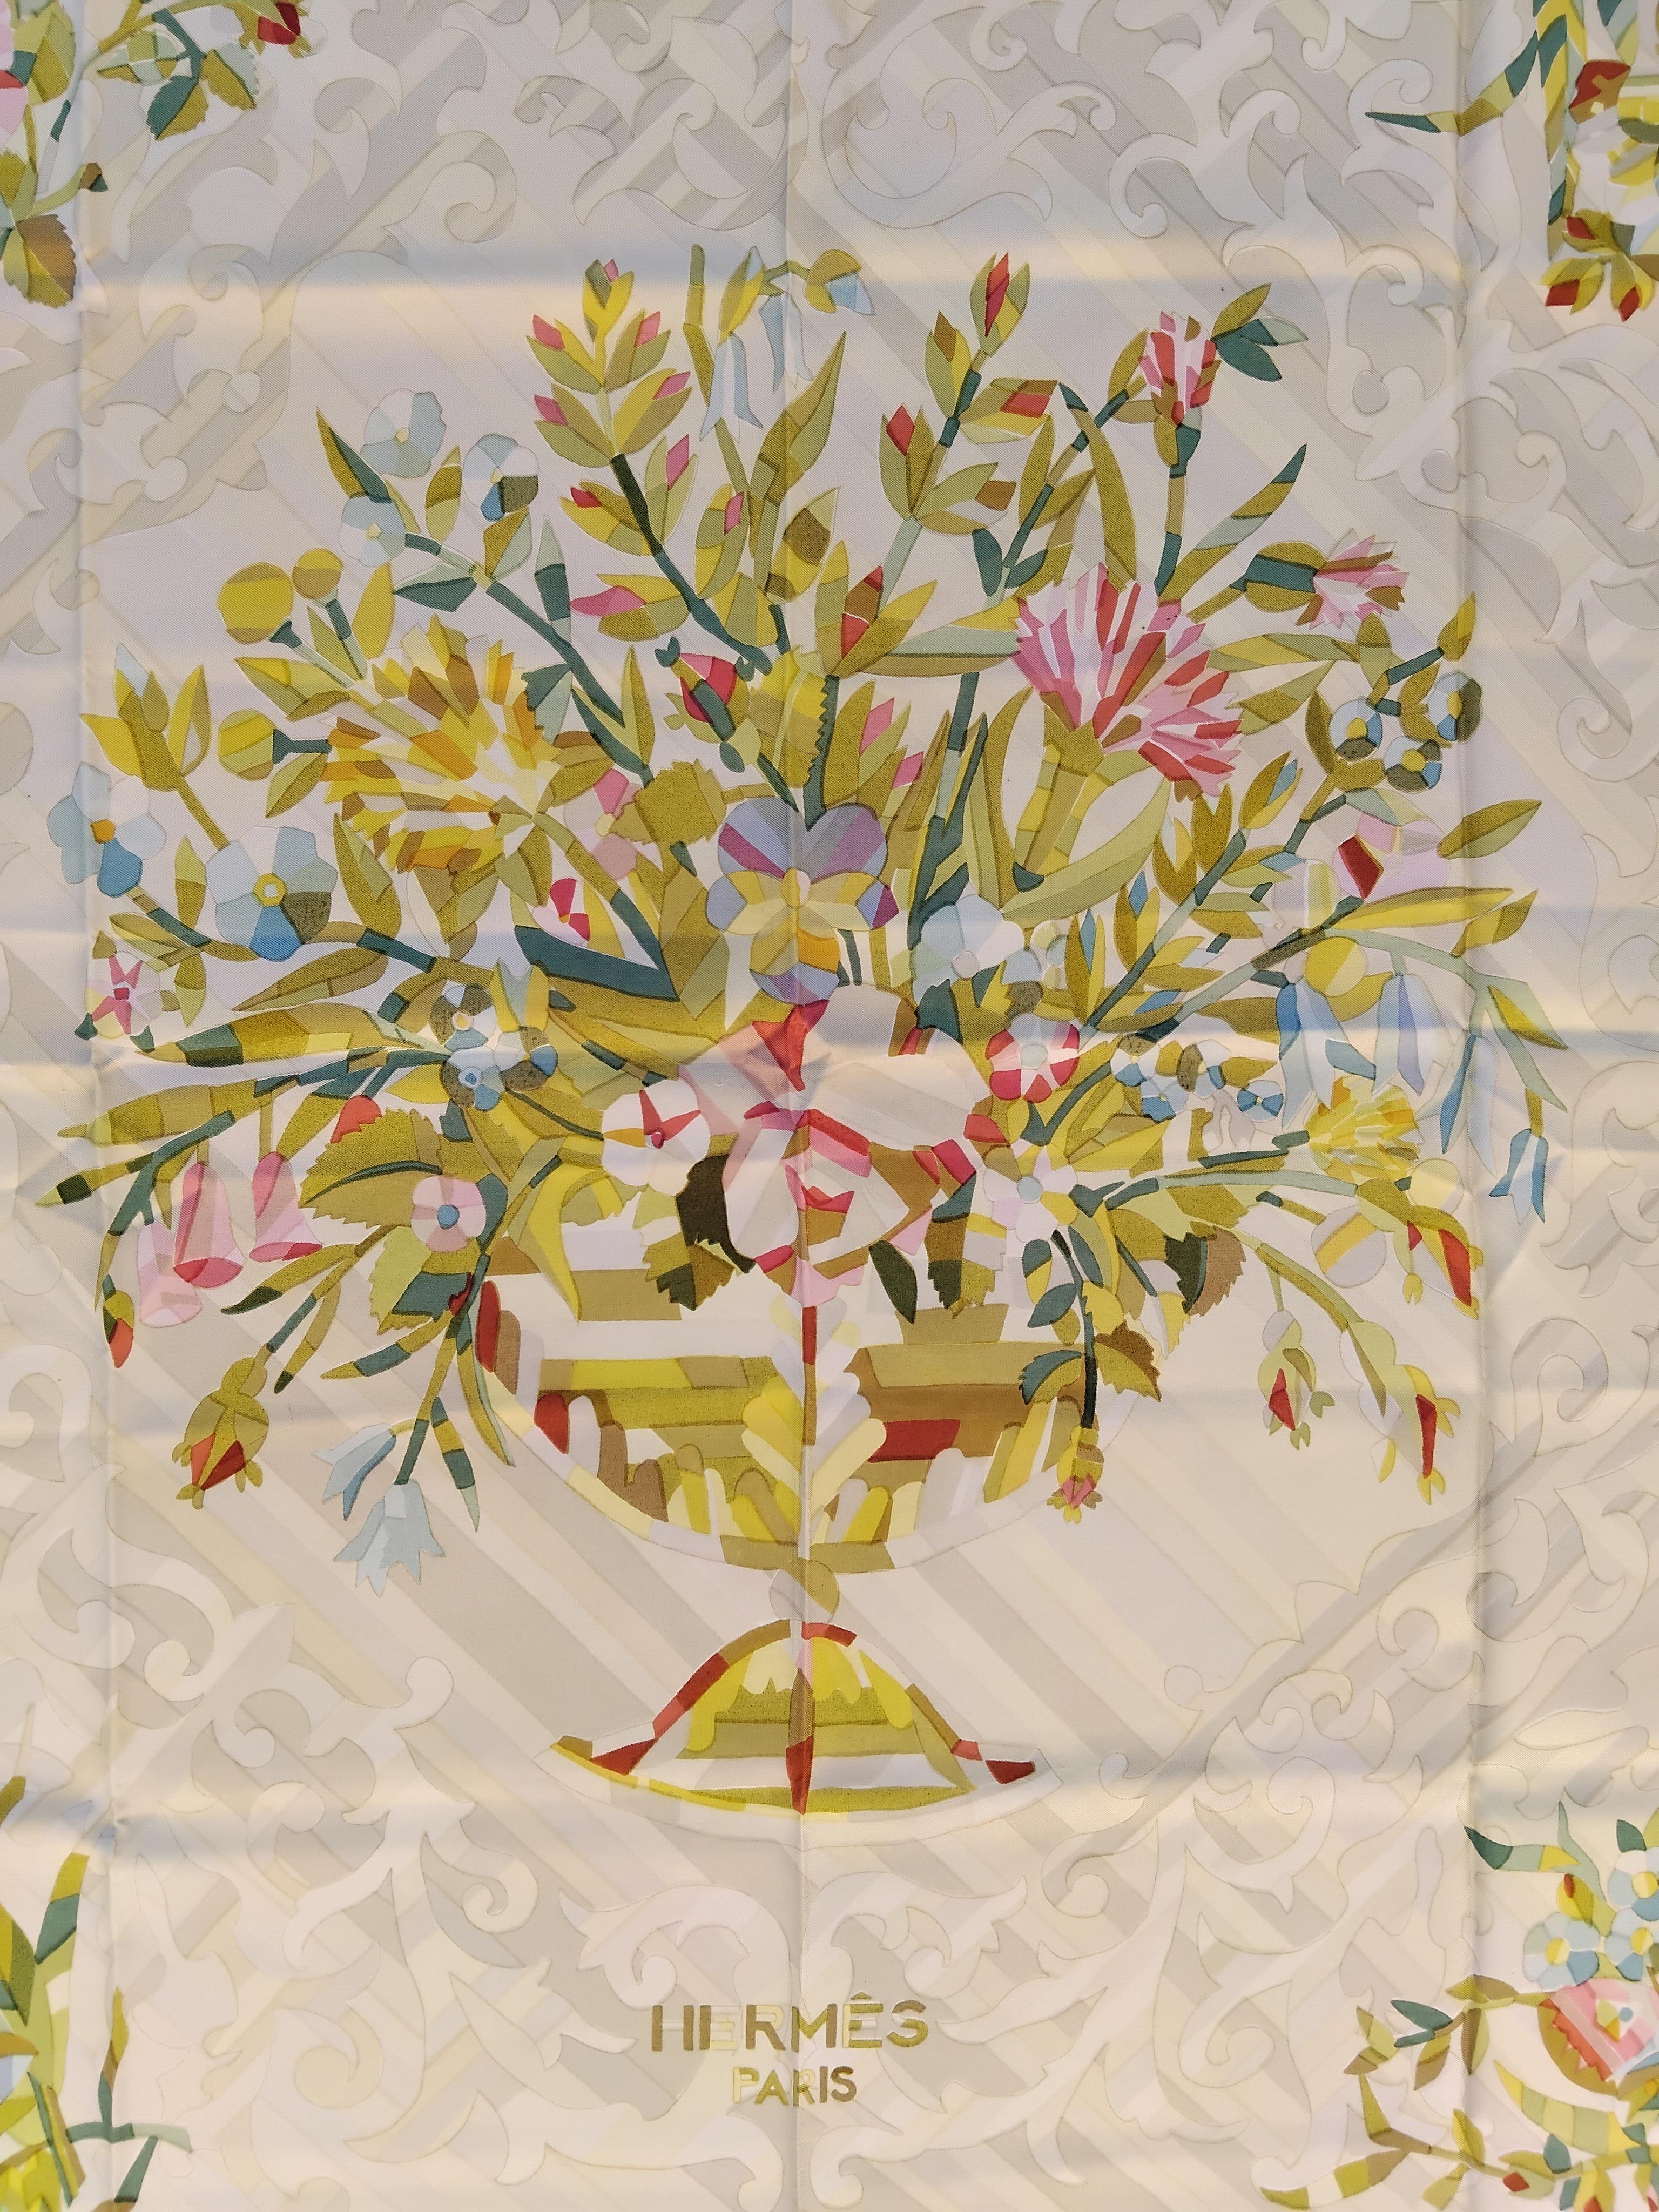 Rare opportunity to get this lovely authentic Hermès Scarf

Print: 